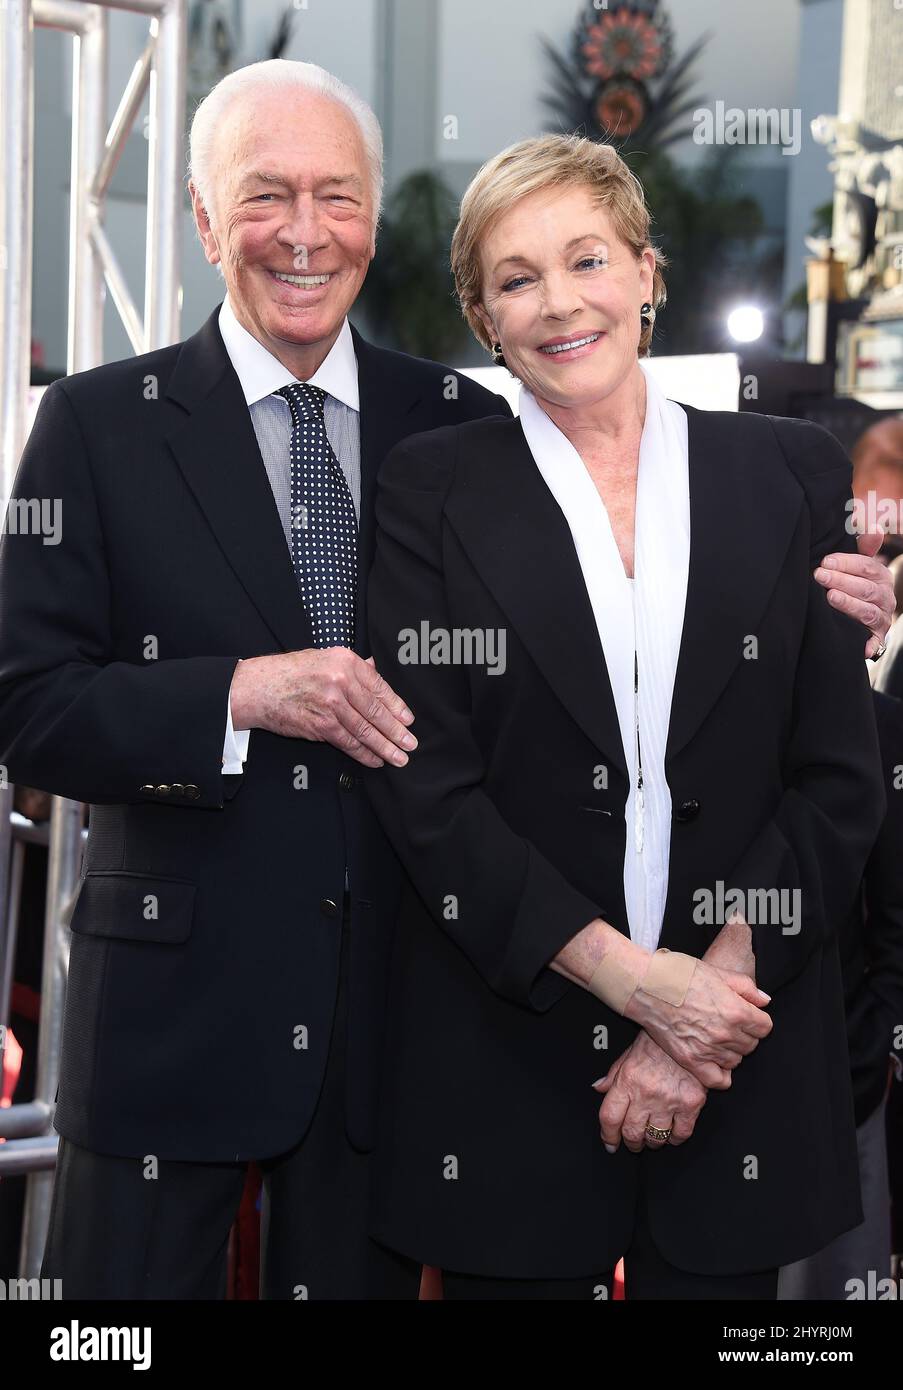 FILE PHOTO: Christopher Plummer, the Canadian-born actor who starred in The Sound of Music died on Friday morning at his home in Connecticut. He was 91. March 26, 2015 Hollywood, Ca. Christopher Plummer and Julie Andrews The 50th Anniversary screening of 'The Sound of Music' presented as the Opening Night Gala of the 2015 TCM Classic Film Festival held at TCL Chinese Theatre Chase Rollins / AFF-USA.COM Stock Photo